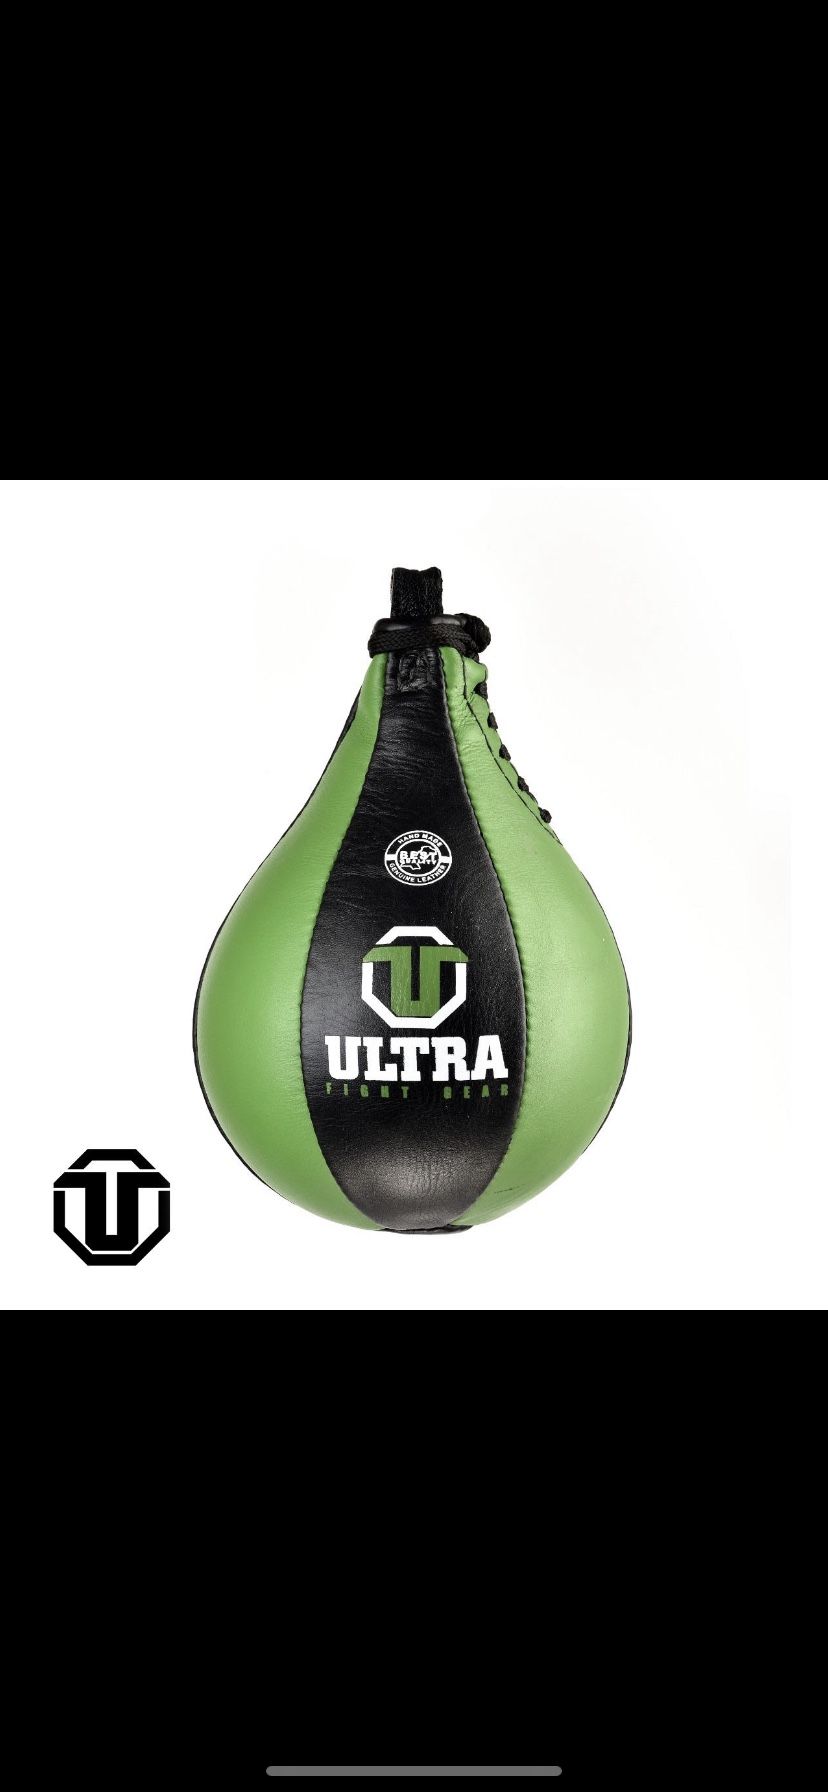 Boxing speed bags